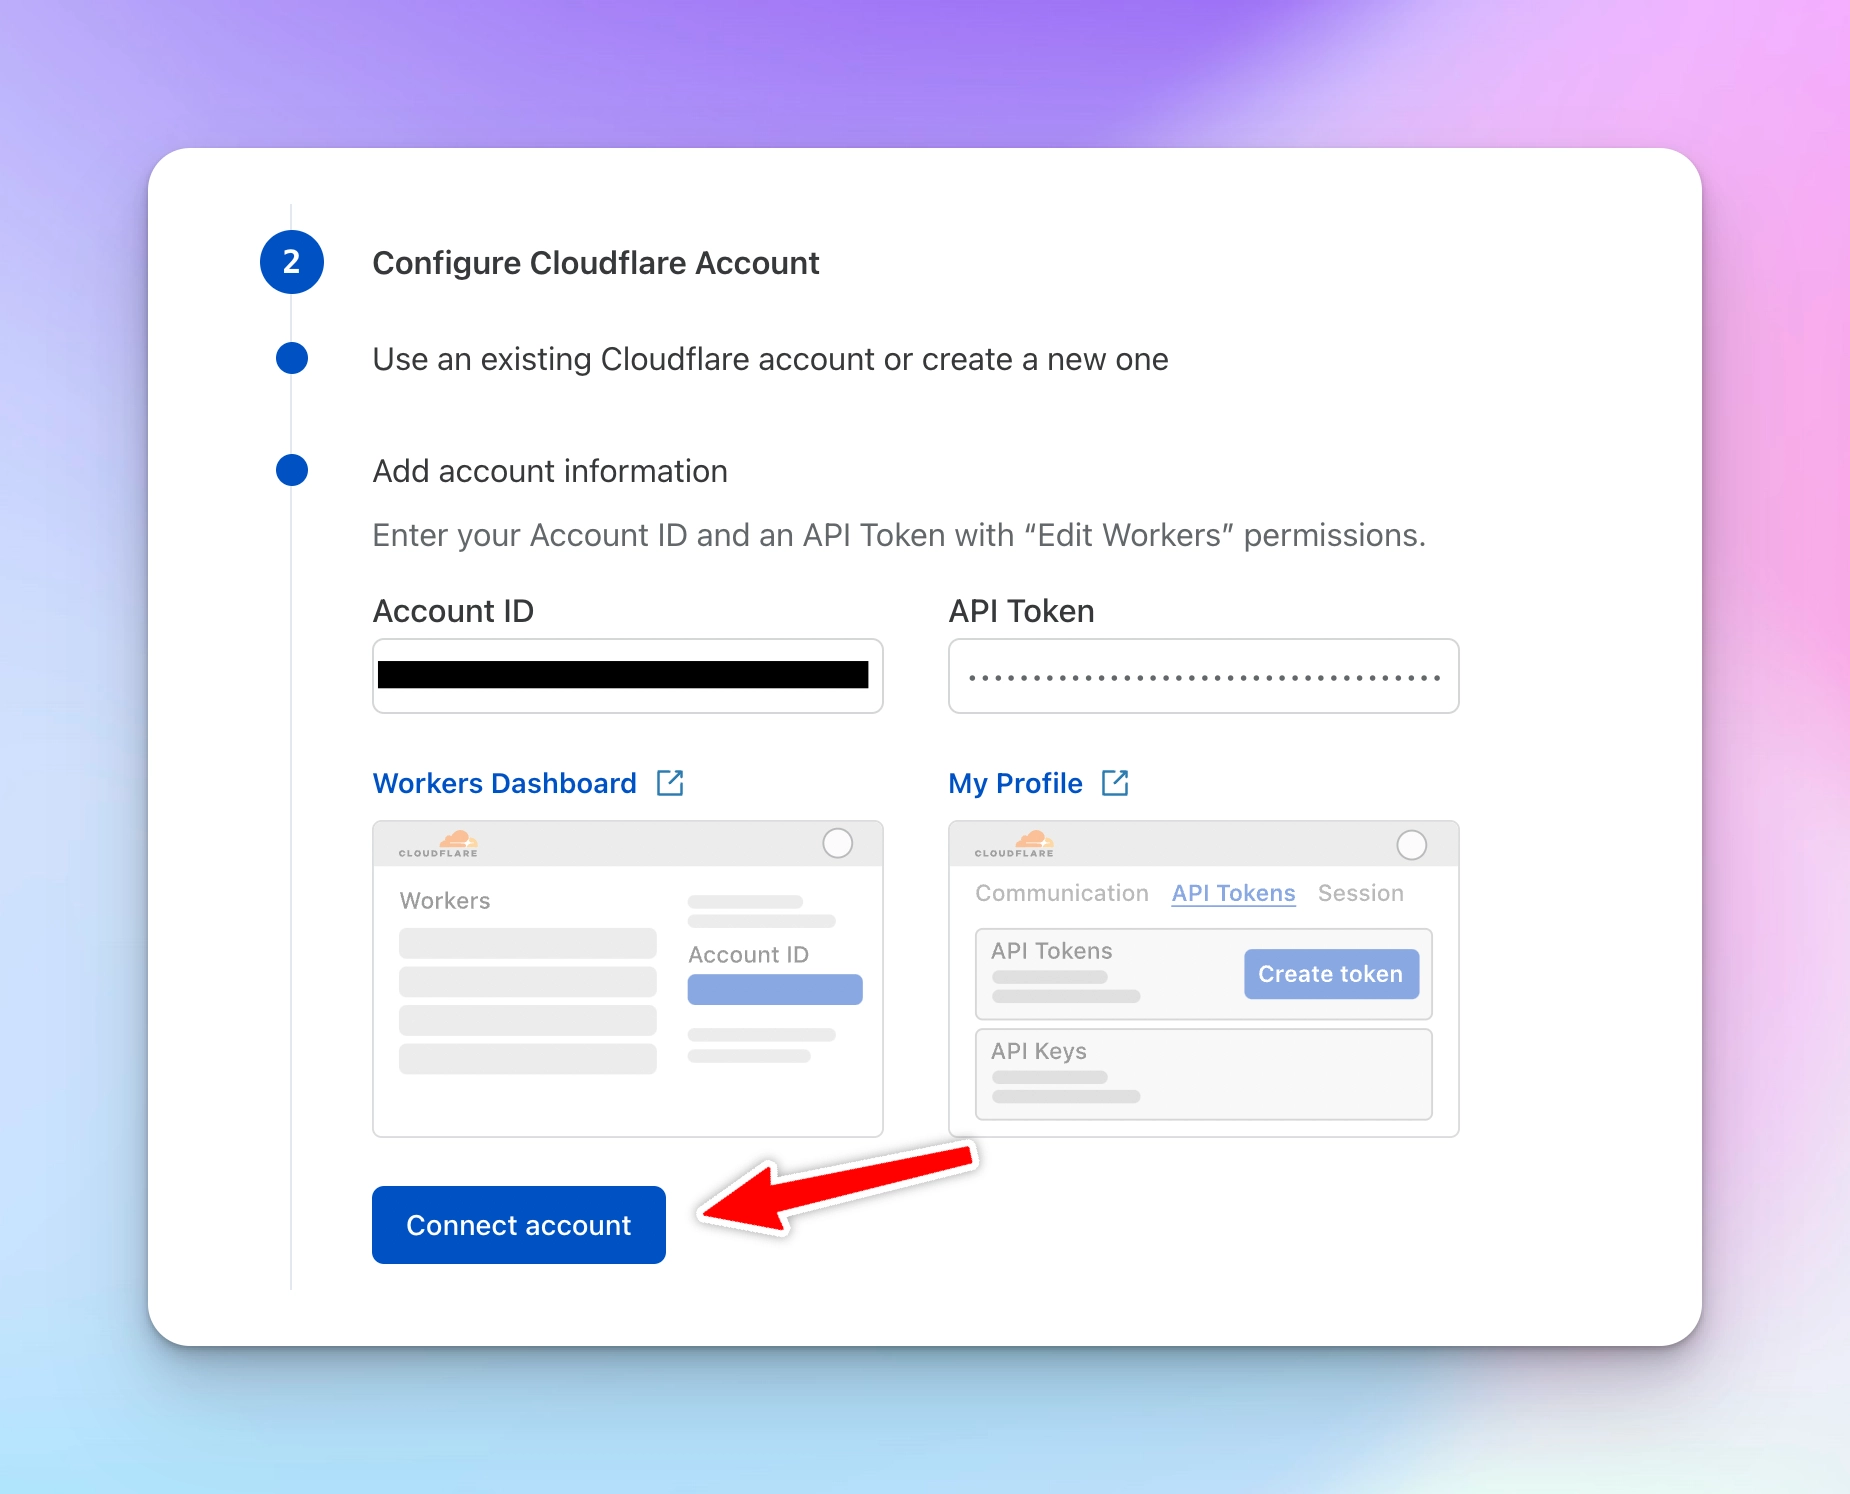 Connect your Cloudflare acccount for the deployment